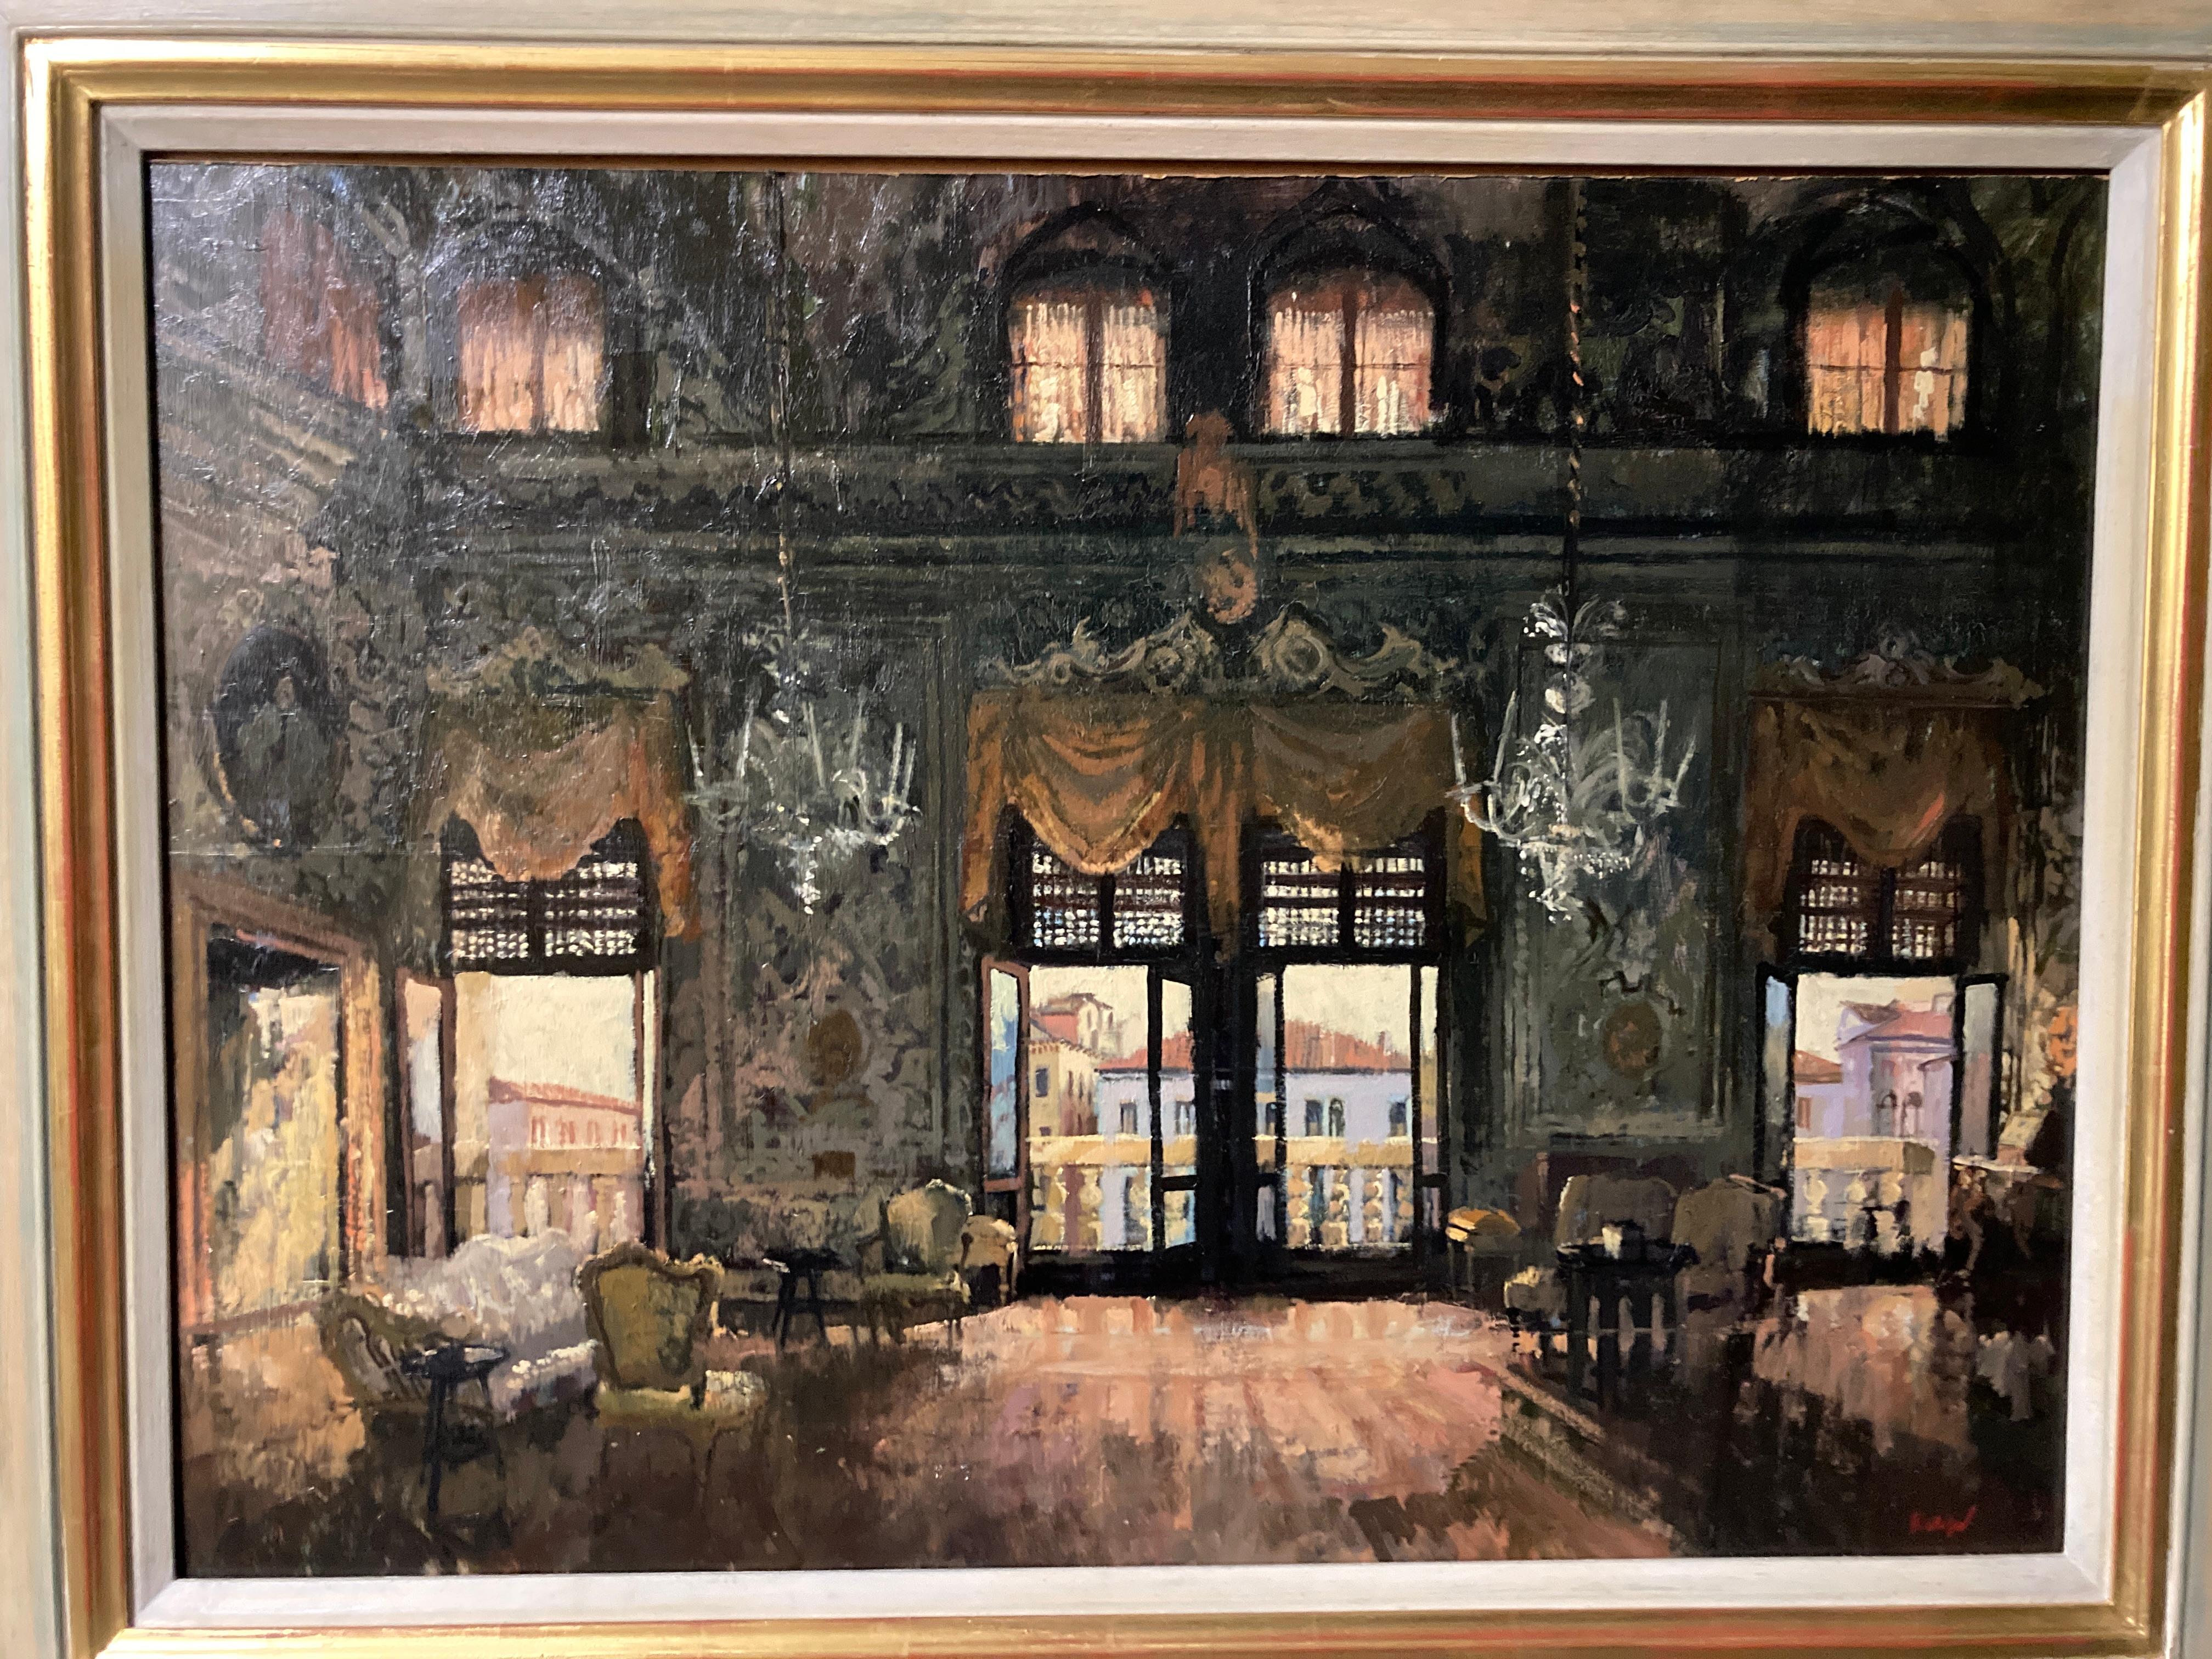 Peter Kuhfeld (b. 1952)
The Salone Grande, Palazzo Barbaro, afternoon
Signed 'Kuhfeld' (lower right)
Original dealer (W.H. Patterson) label at rear
oil on canvas
21 x 29 inches. (52.5 x 73 cm.)